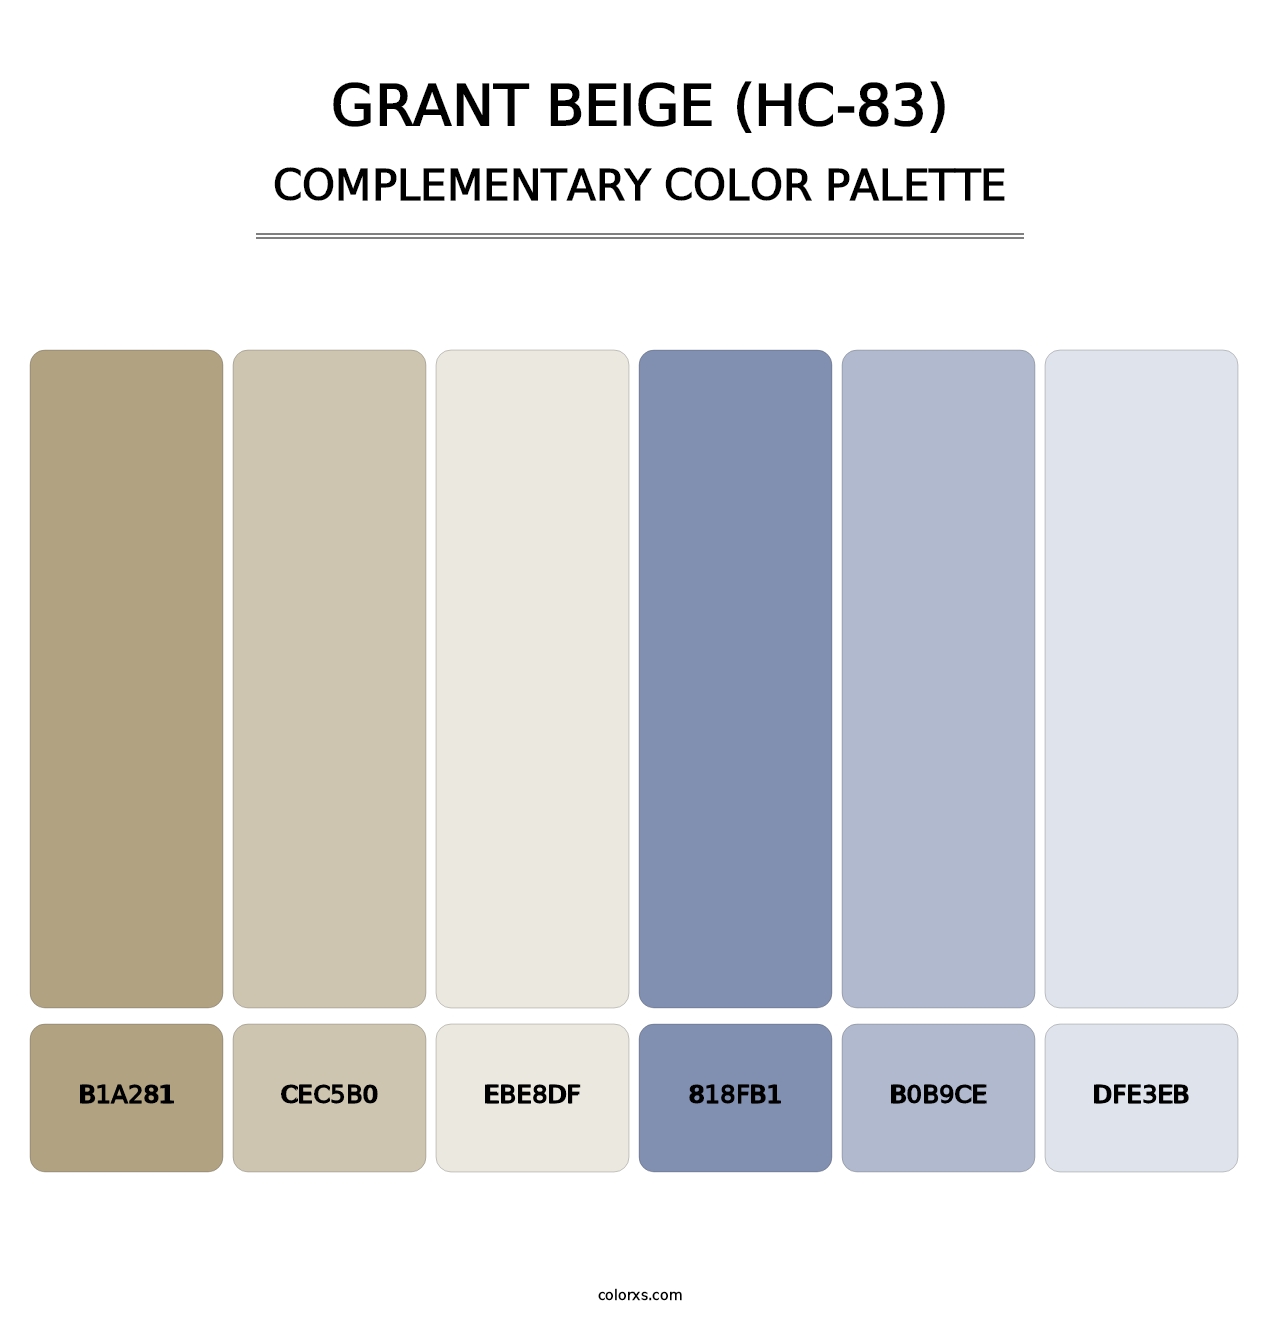 Grant Beige (HC-83) - Complementary Color Palette